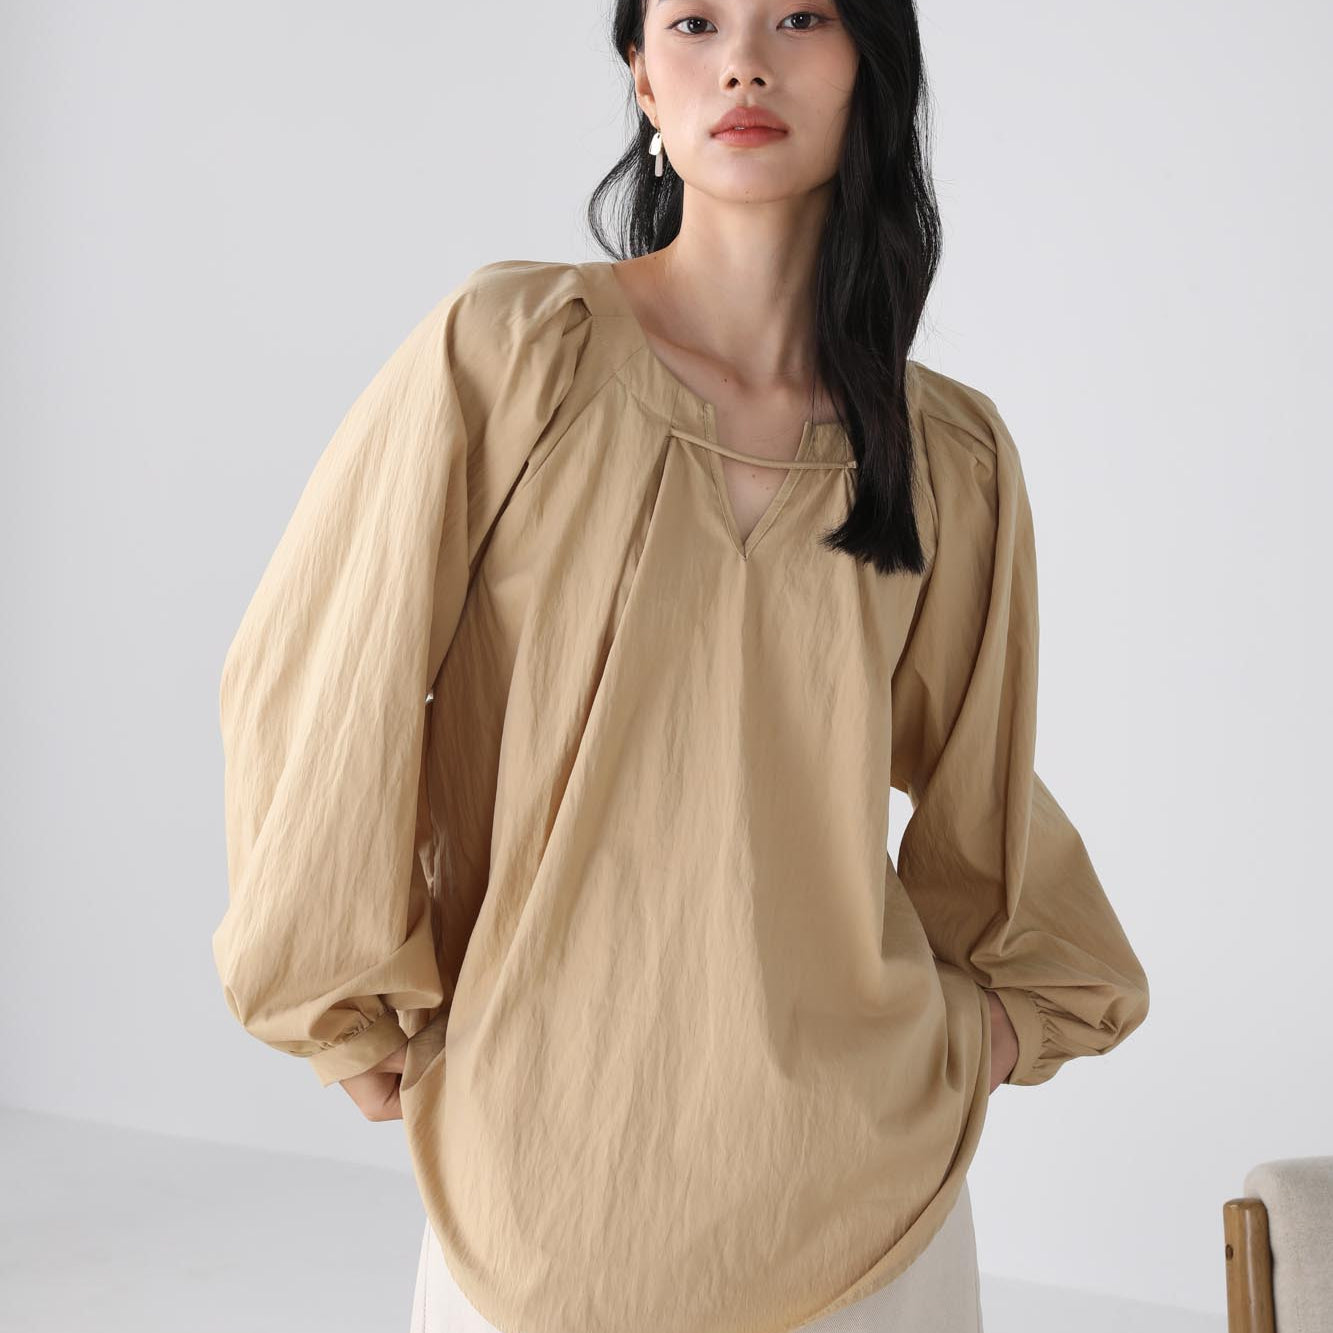 Evie tan casual fit top